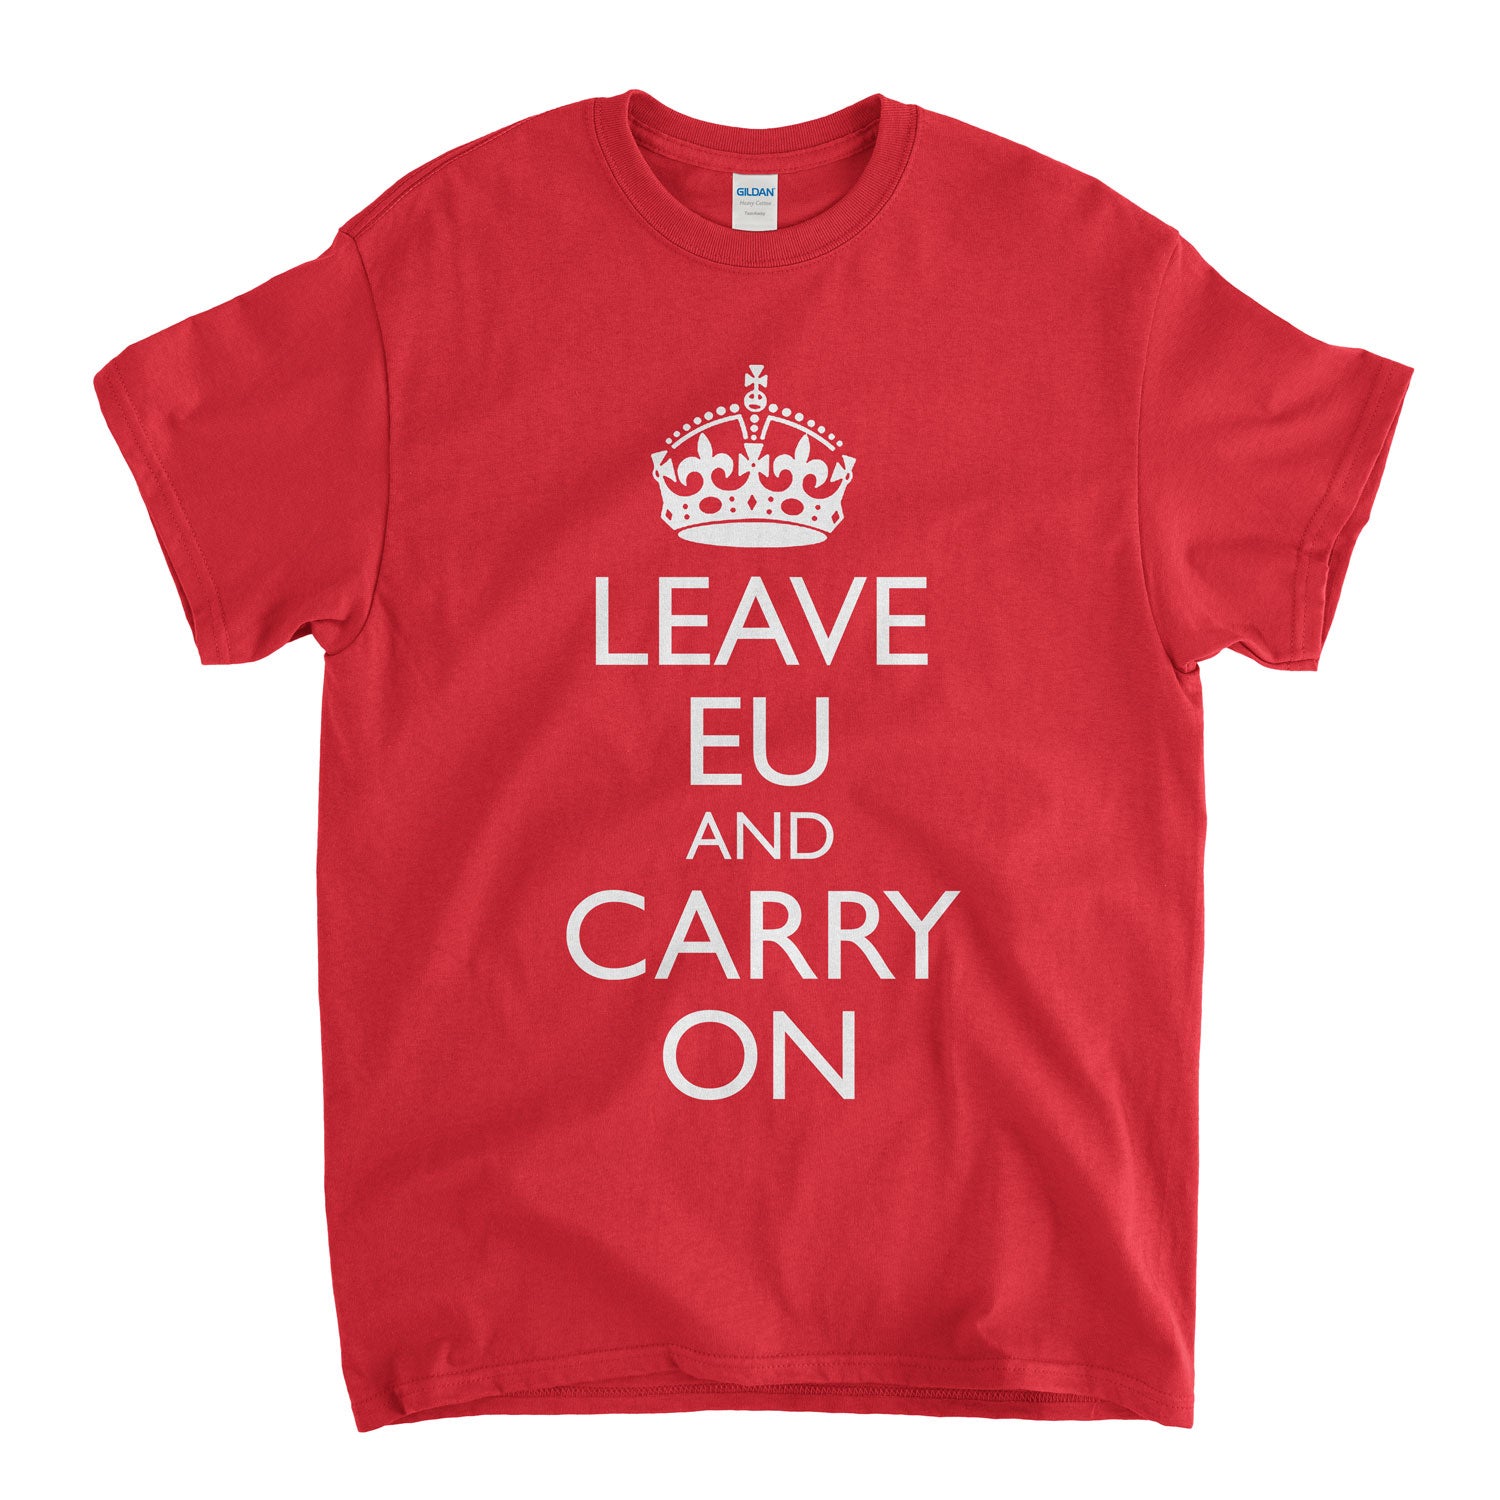 Leave The Eu and Carry On T Shirt Pro Brexit Classic